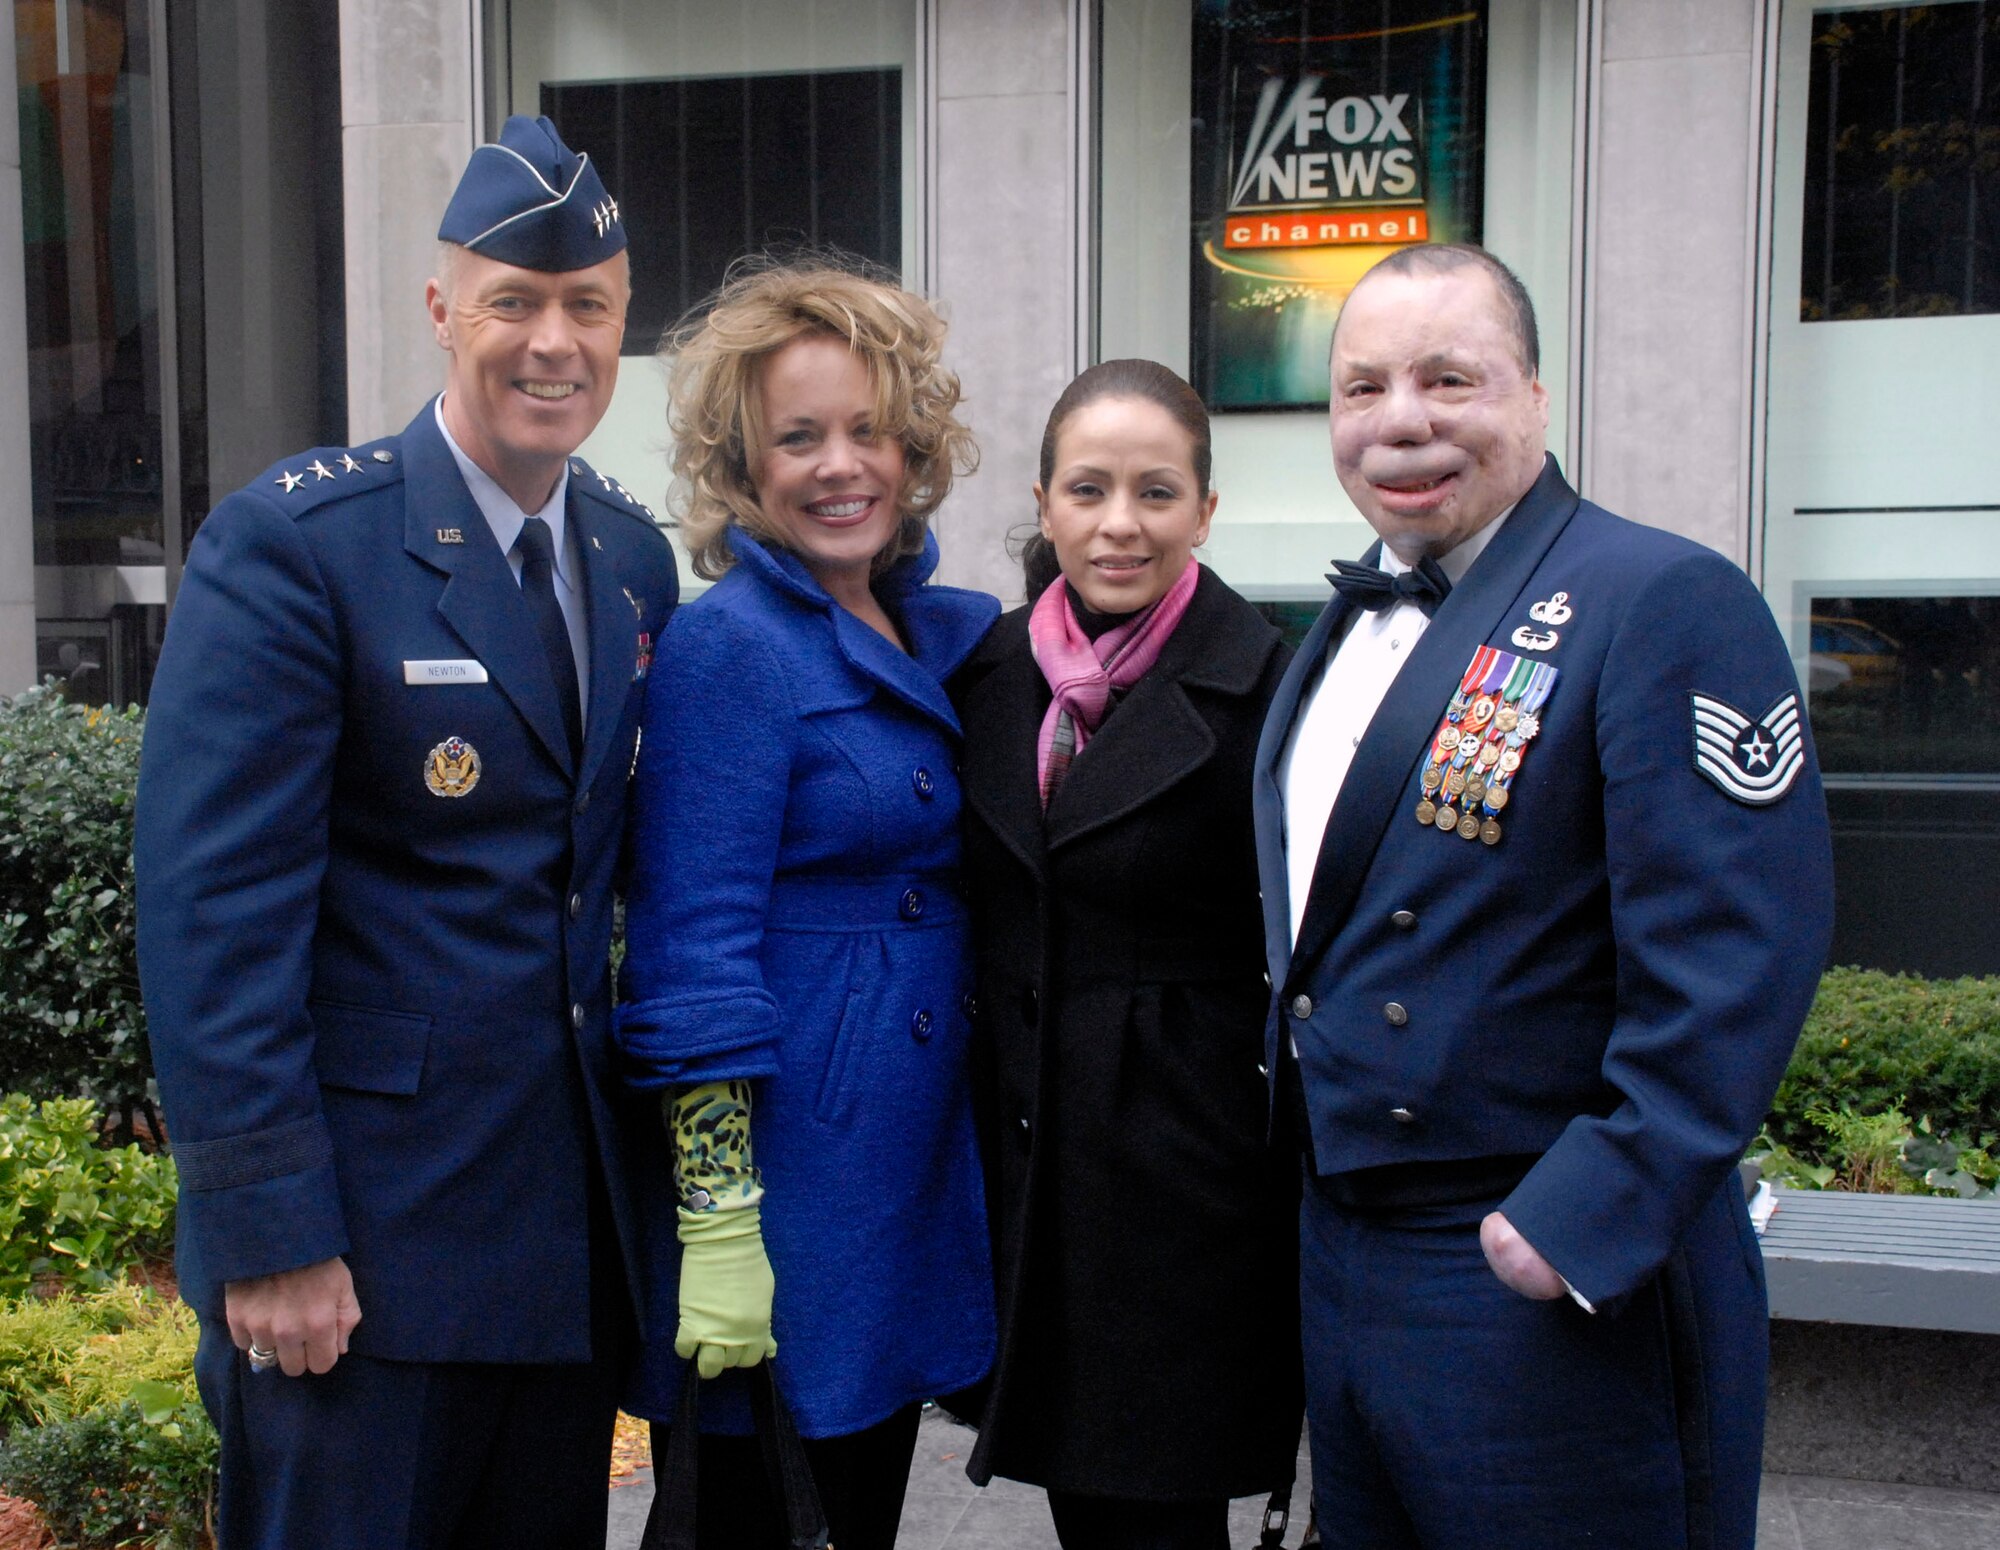 Lt. Gen. Richard Y. Newton III, Jody Newton, Carmen Del Toro and Tech. Sgt. Israel Del Toro stand outside Fox News following an interview with the men on "Warrior Care Month" Nov. 10 in New York City. General Newton is the deputy chief of staff for manpower, personnel and services at the Pentagon. Sergeant Del Toro was a joint tactical air control party operator who was wounded Dec. 4, 2005, when the Humvee he was riding in rolled over a roadside bomb in Afghanistan. (U.S. Air Force photo/Staff Sgt. Monique Randolph) 
